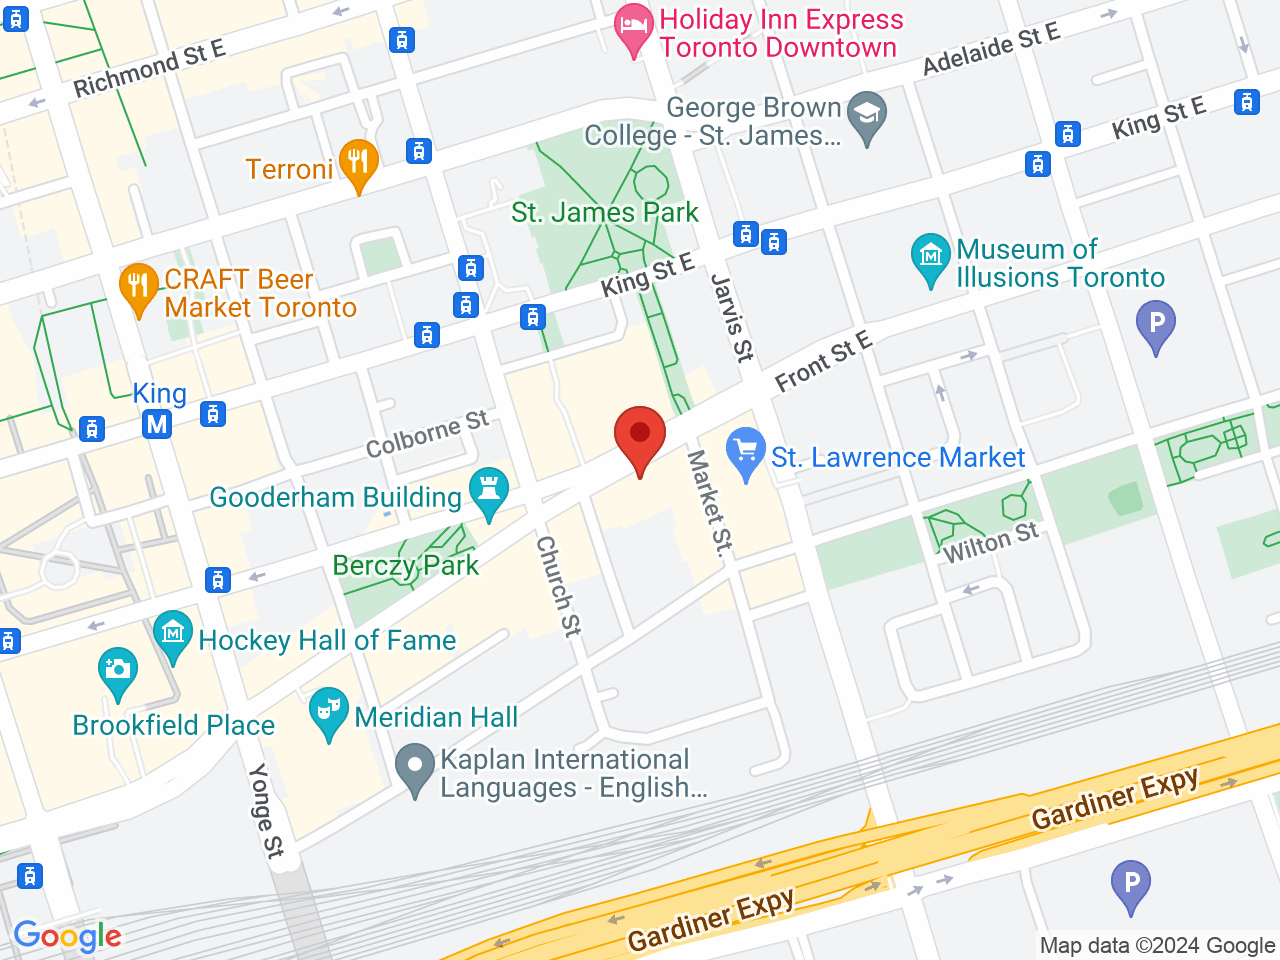 Street map for Canna Cabana 79 Front (Meta), 79 Front St E, Toronto ON